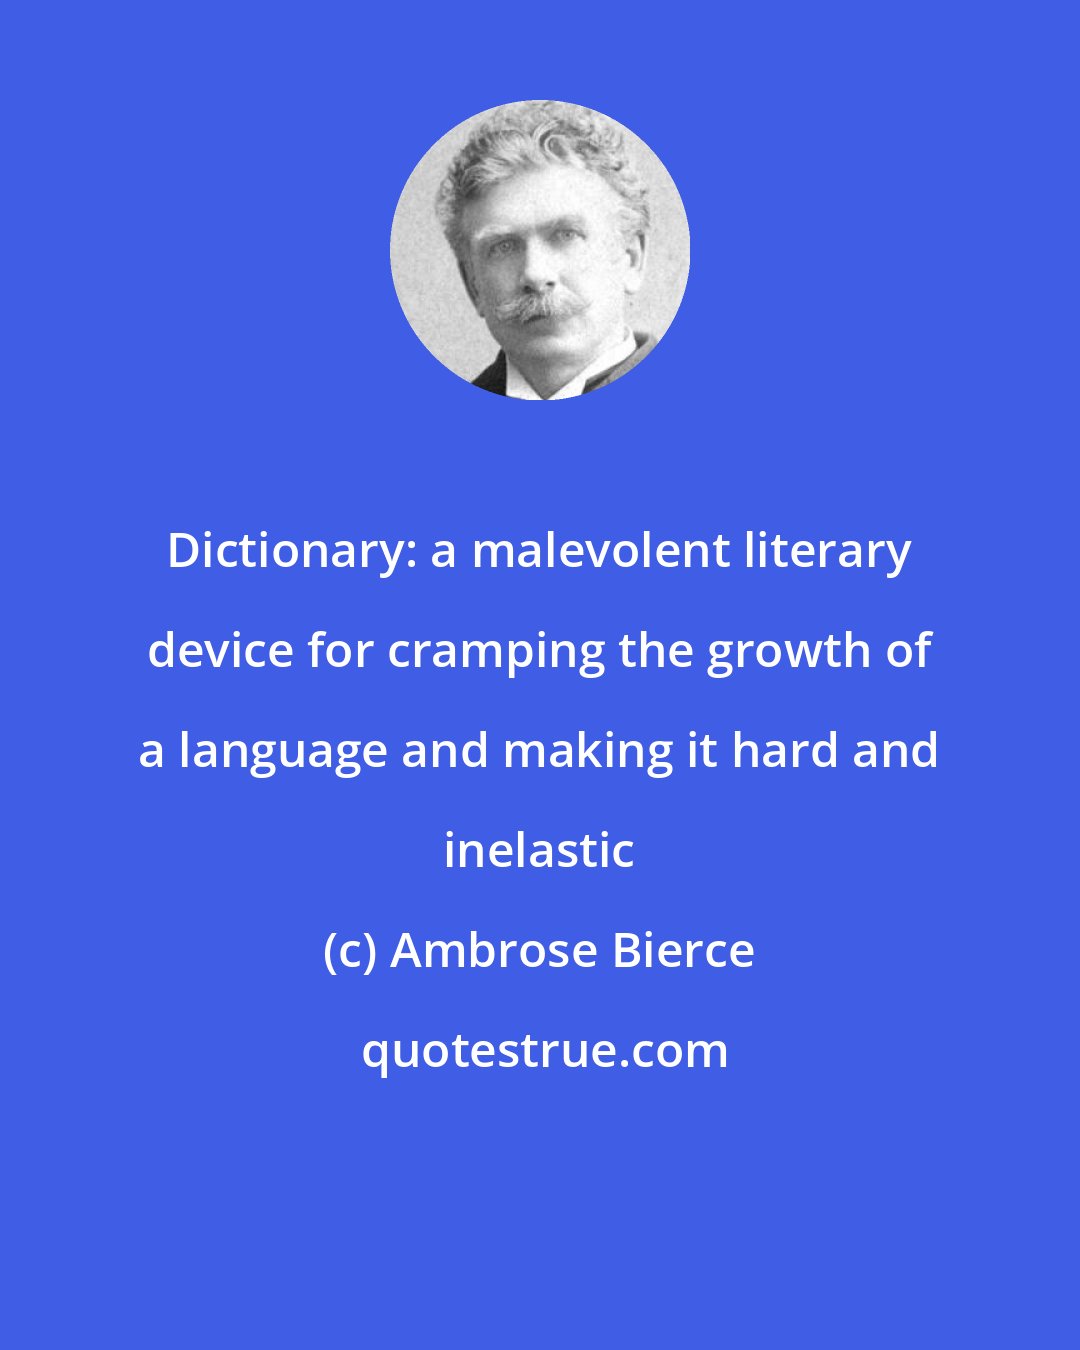 Ambrose Bierce: Dictionary: a malevolent literary device for cramping the growth of a language and making it hard and inelastic